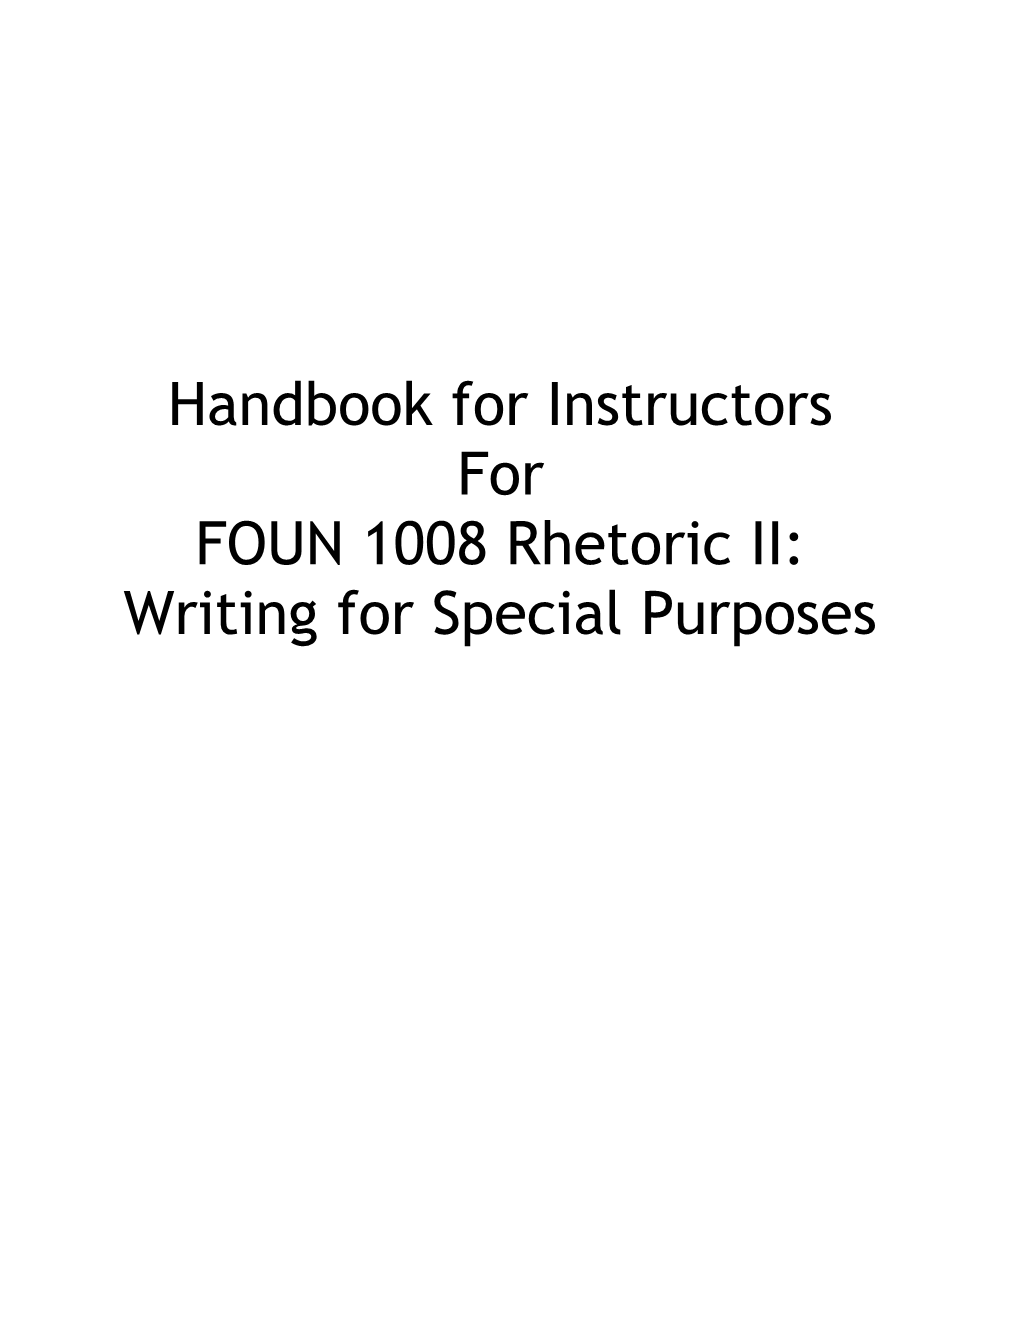 Handbook for Instructors for FOUN 1008 Rhetoric II: Writing for Special Purposes